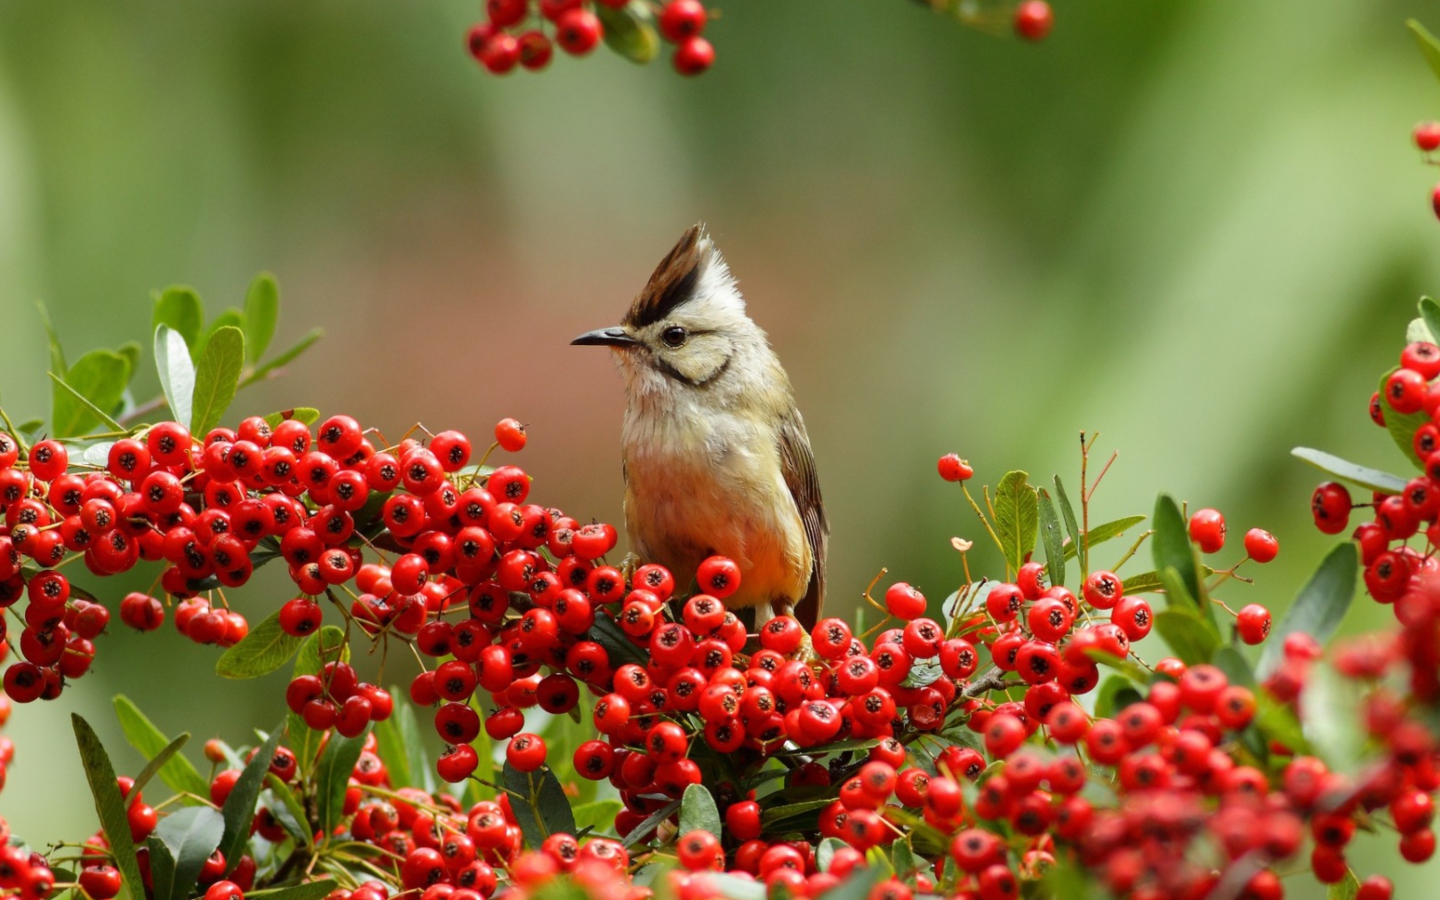 Bird On Branch With Red Berries wallpaper 1440x900